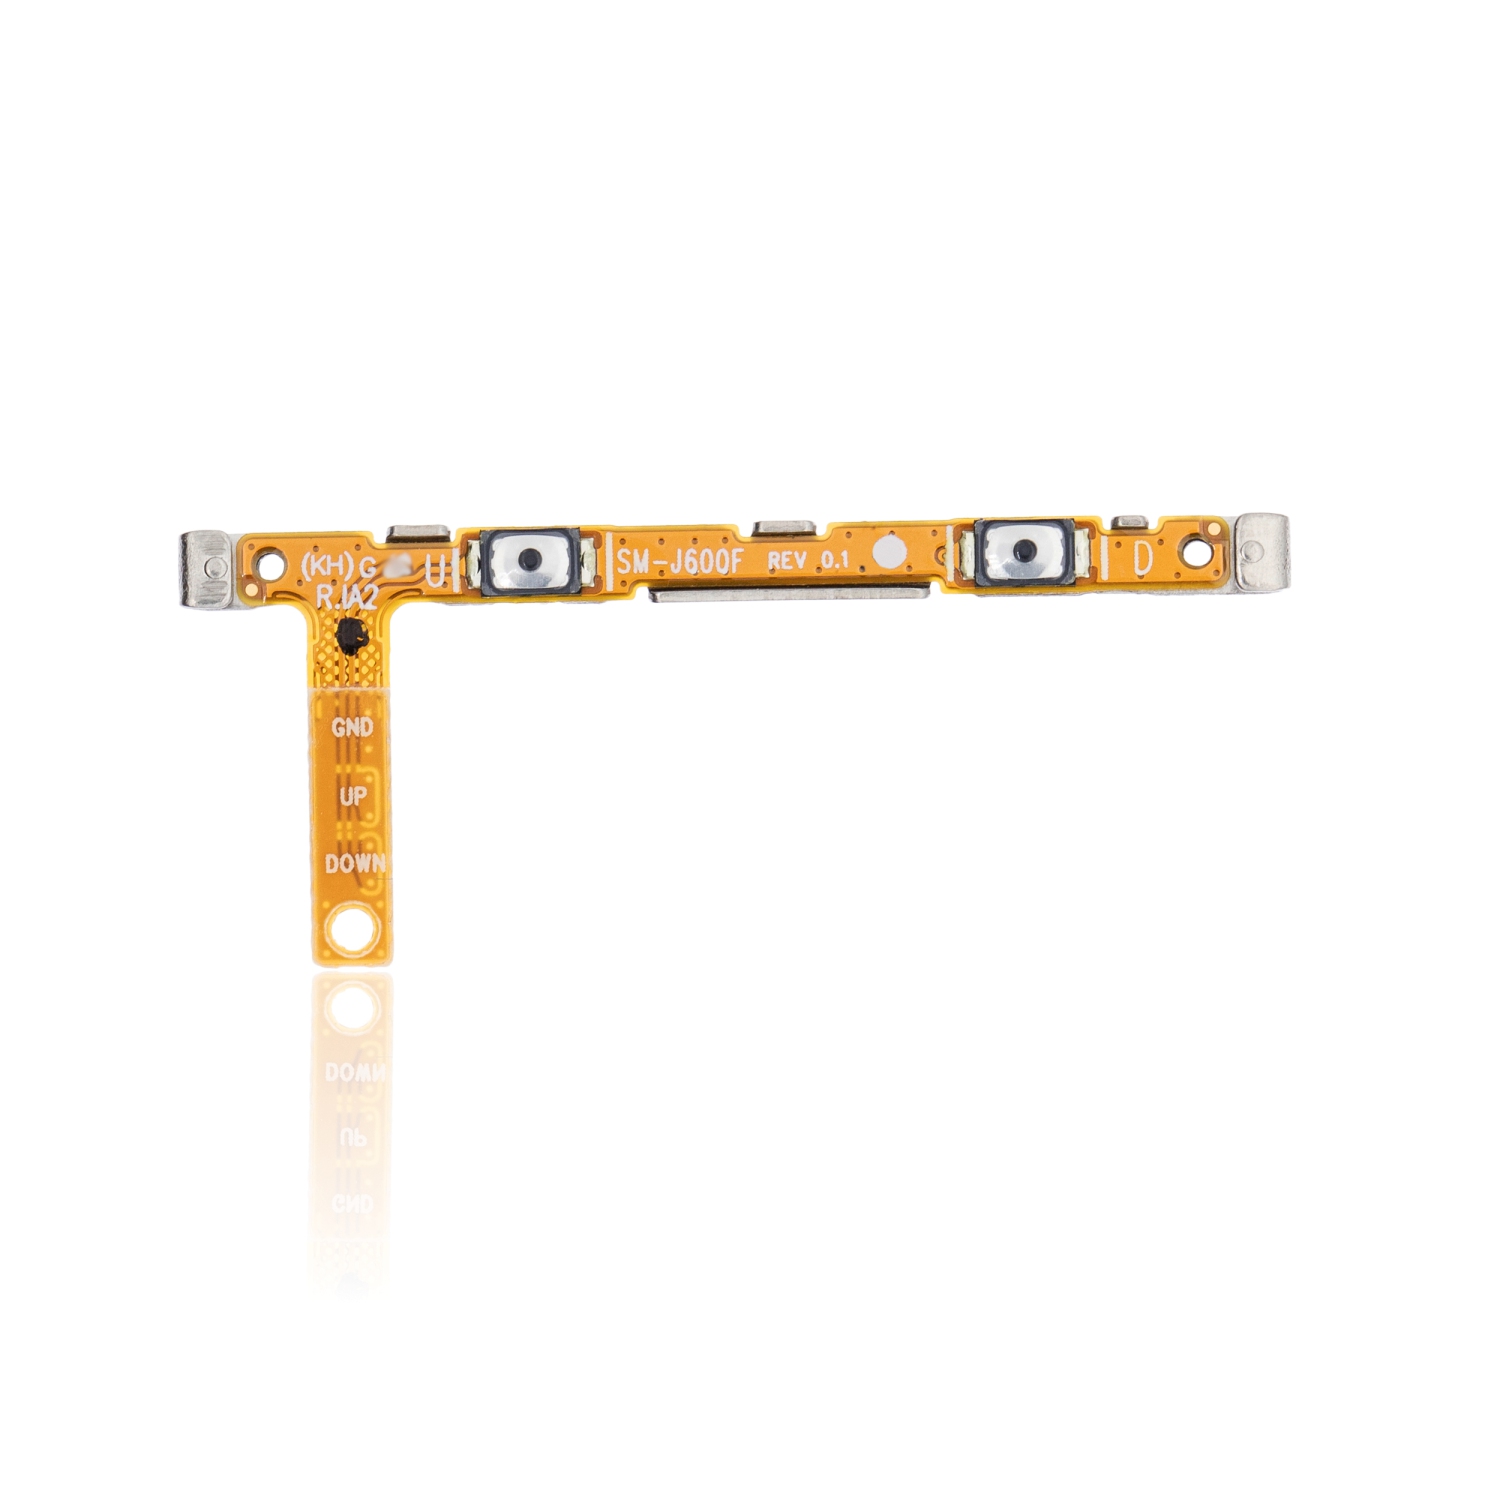 Replacement Volume Button Flex Cable Compatible For Samsung Galaxy A6 (A600 / 2018) / A6 Plus (A605 / 2018)